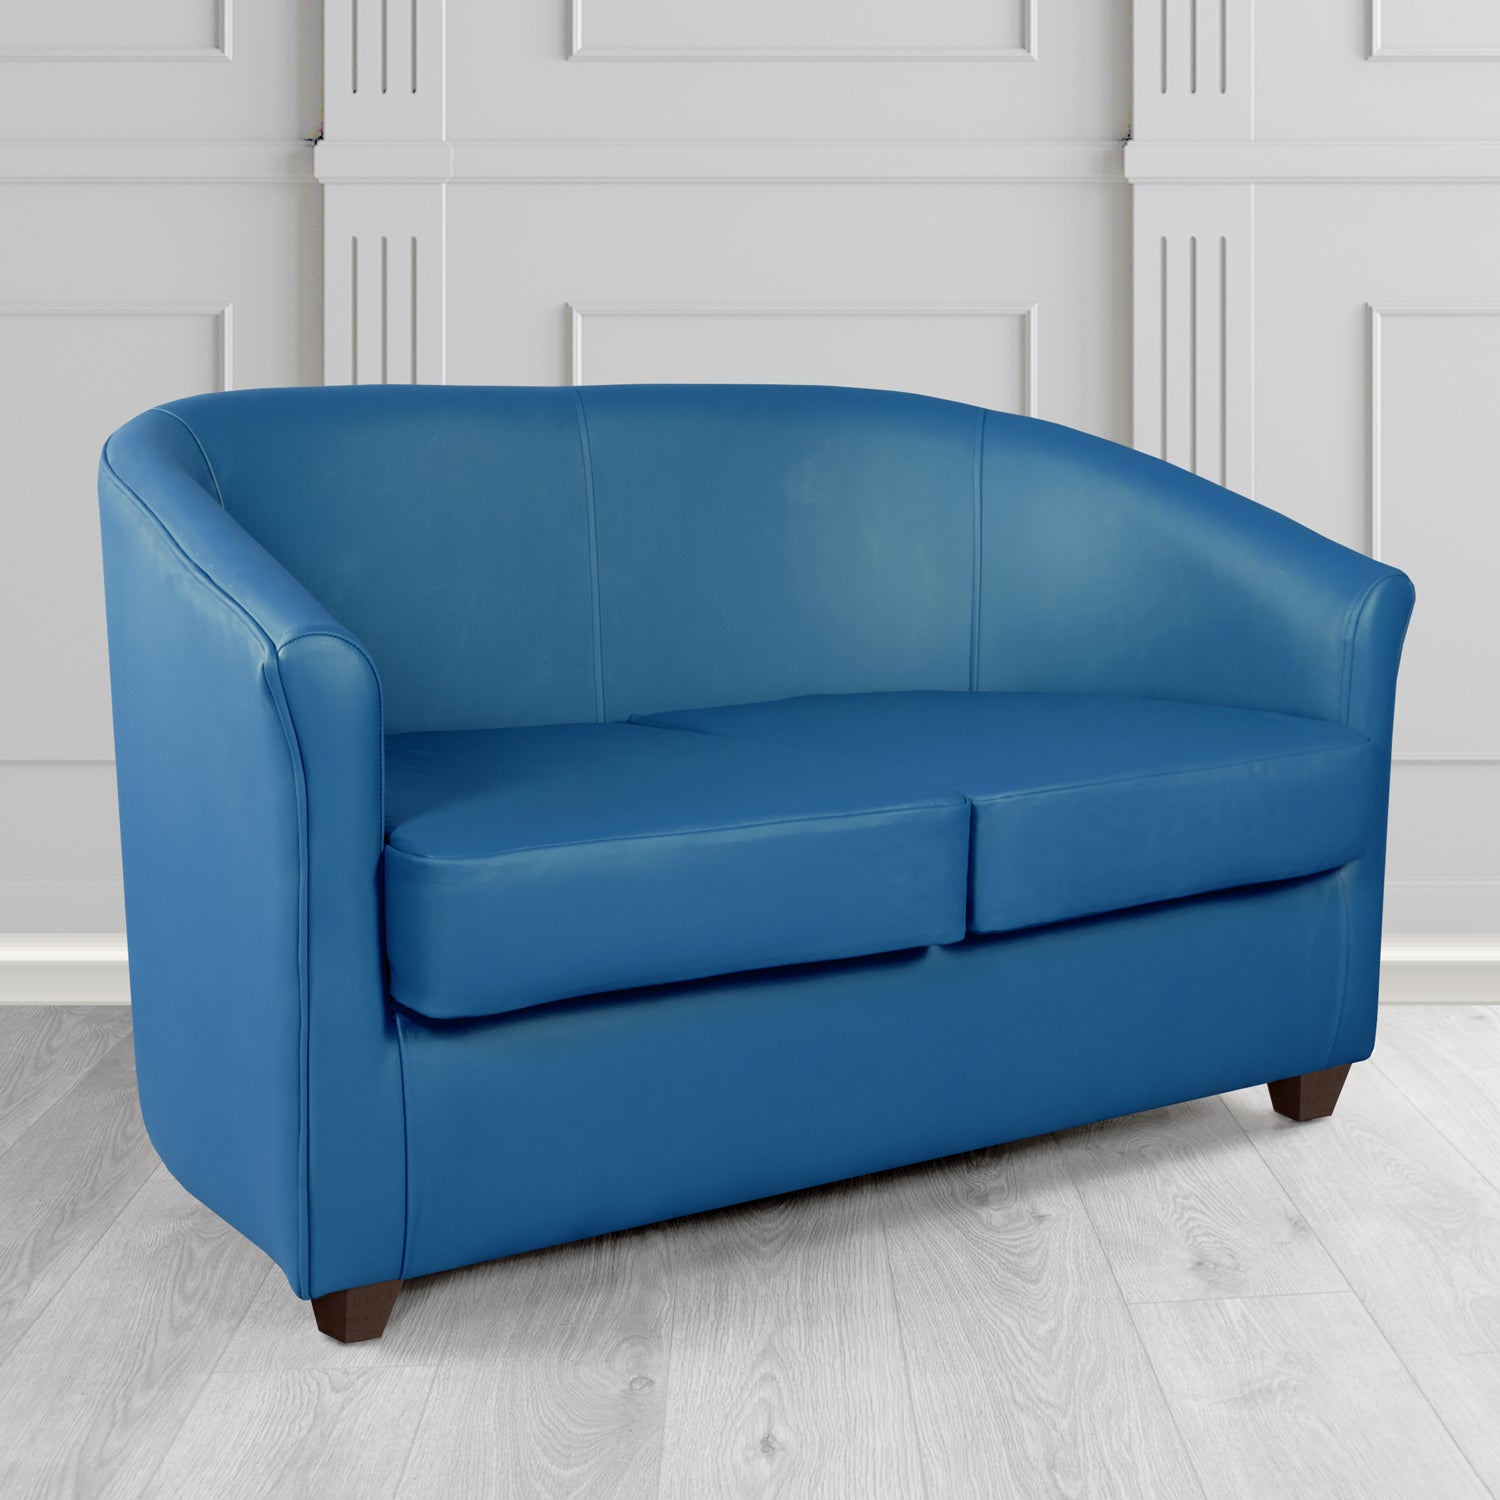 Cannes 2 Seater Tub Sofa in Madrid Royal Faux Leather - The Tub Chair Shop